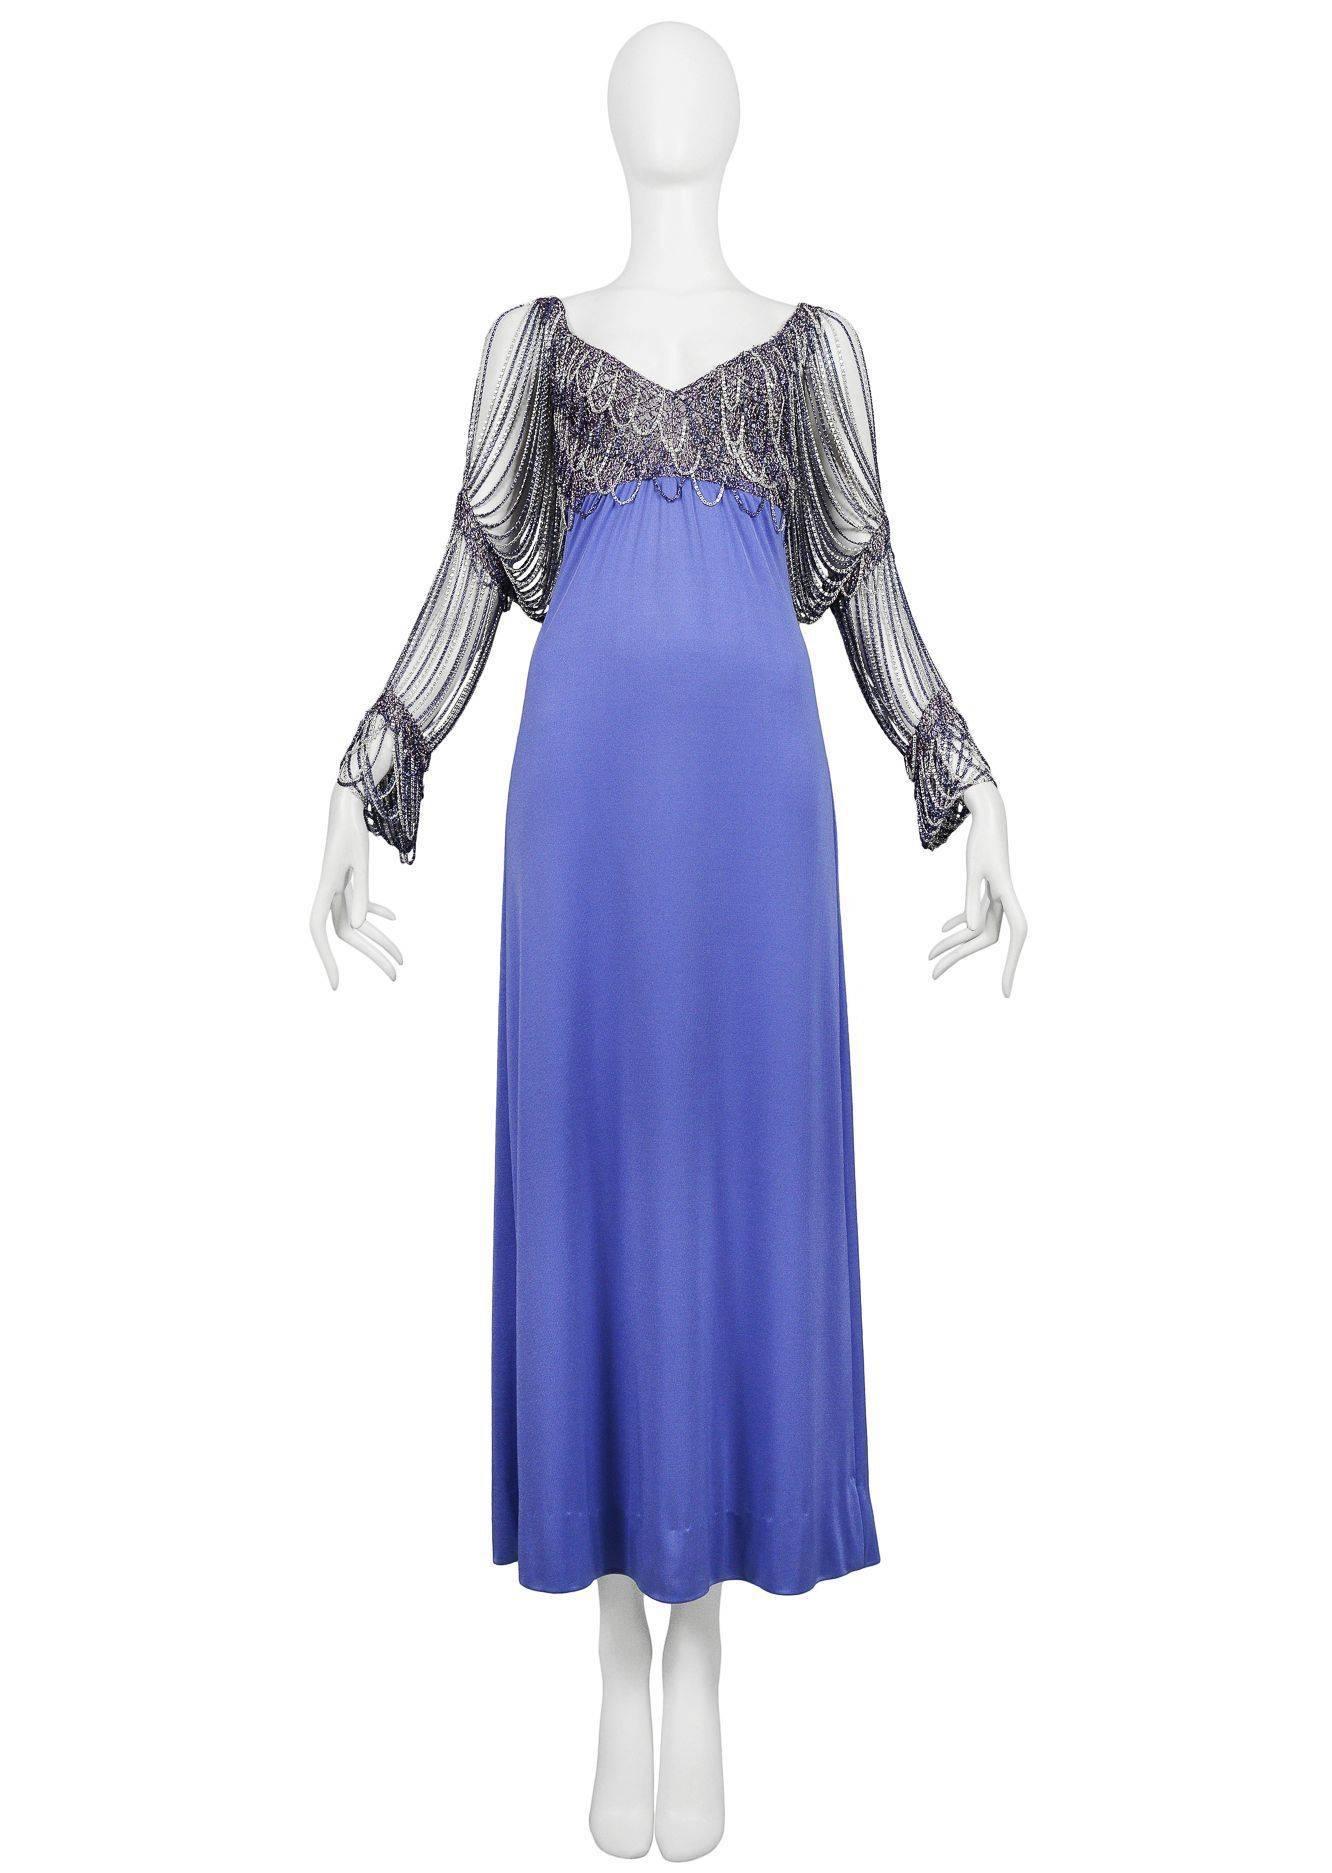 Vintage Loris Azzaro periwinkle blue maxi gown featuring a v-neckline adorned with purple and silver metal chain that extends over the bust and envelops the arms like chain linked sleeves.

Excellent Vintage Condition.